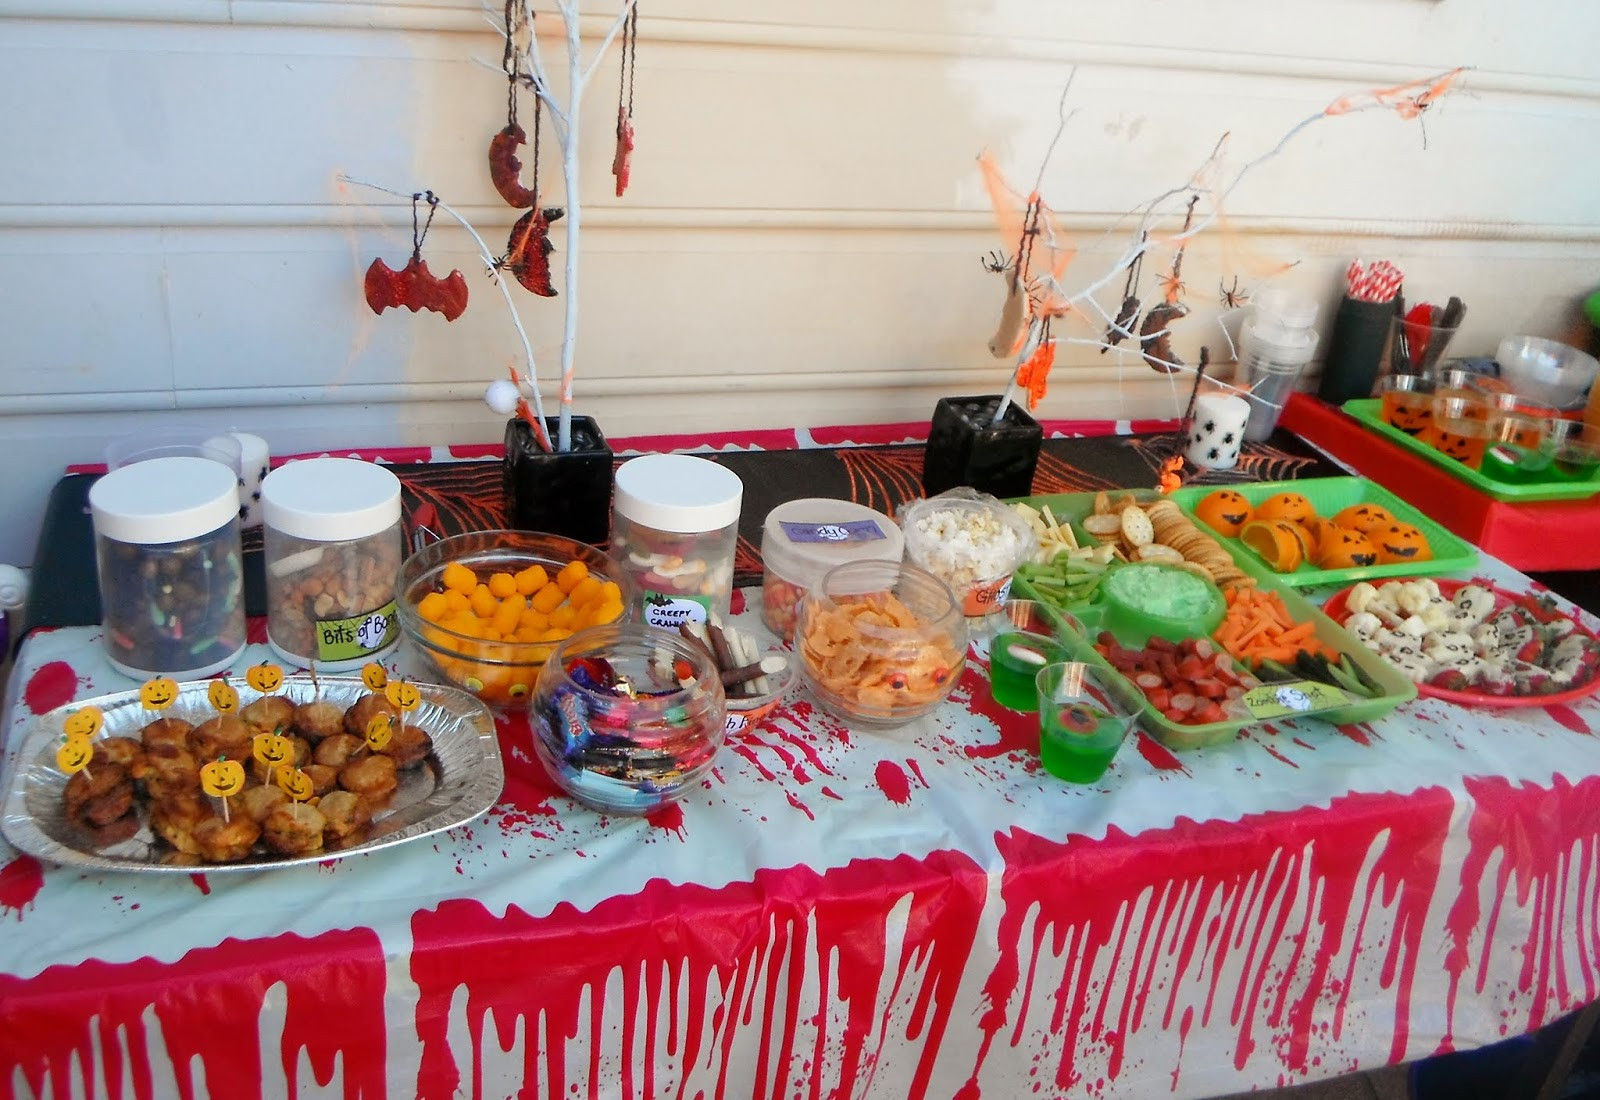 Halloween Kids Birthday Party Ideas
 Adventures at home with Mum Halloween Party Food